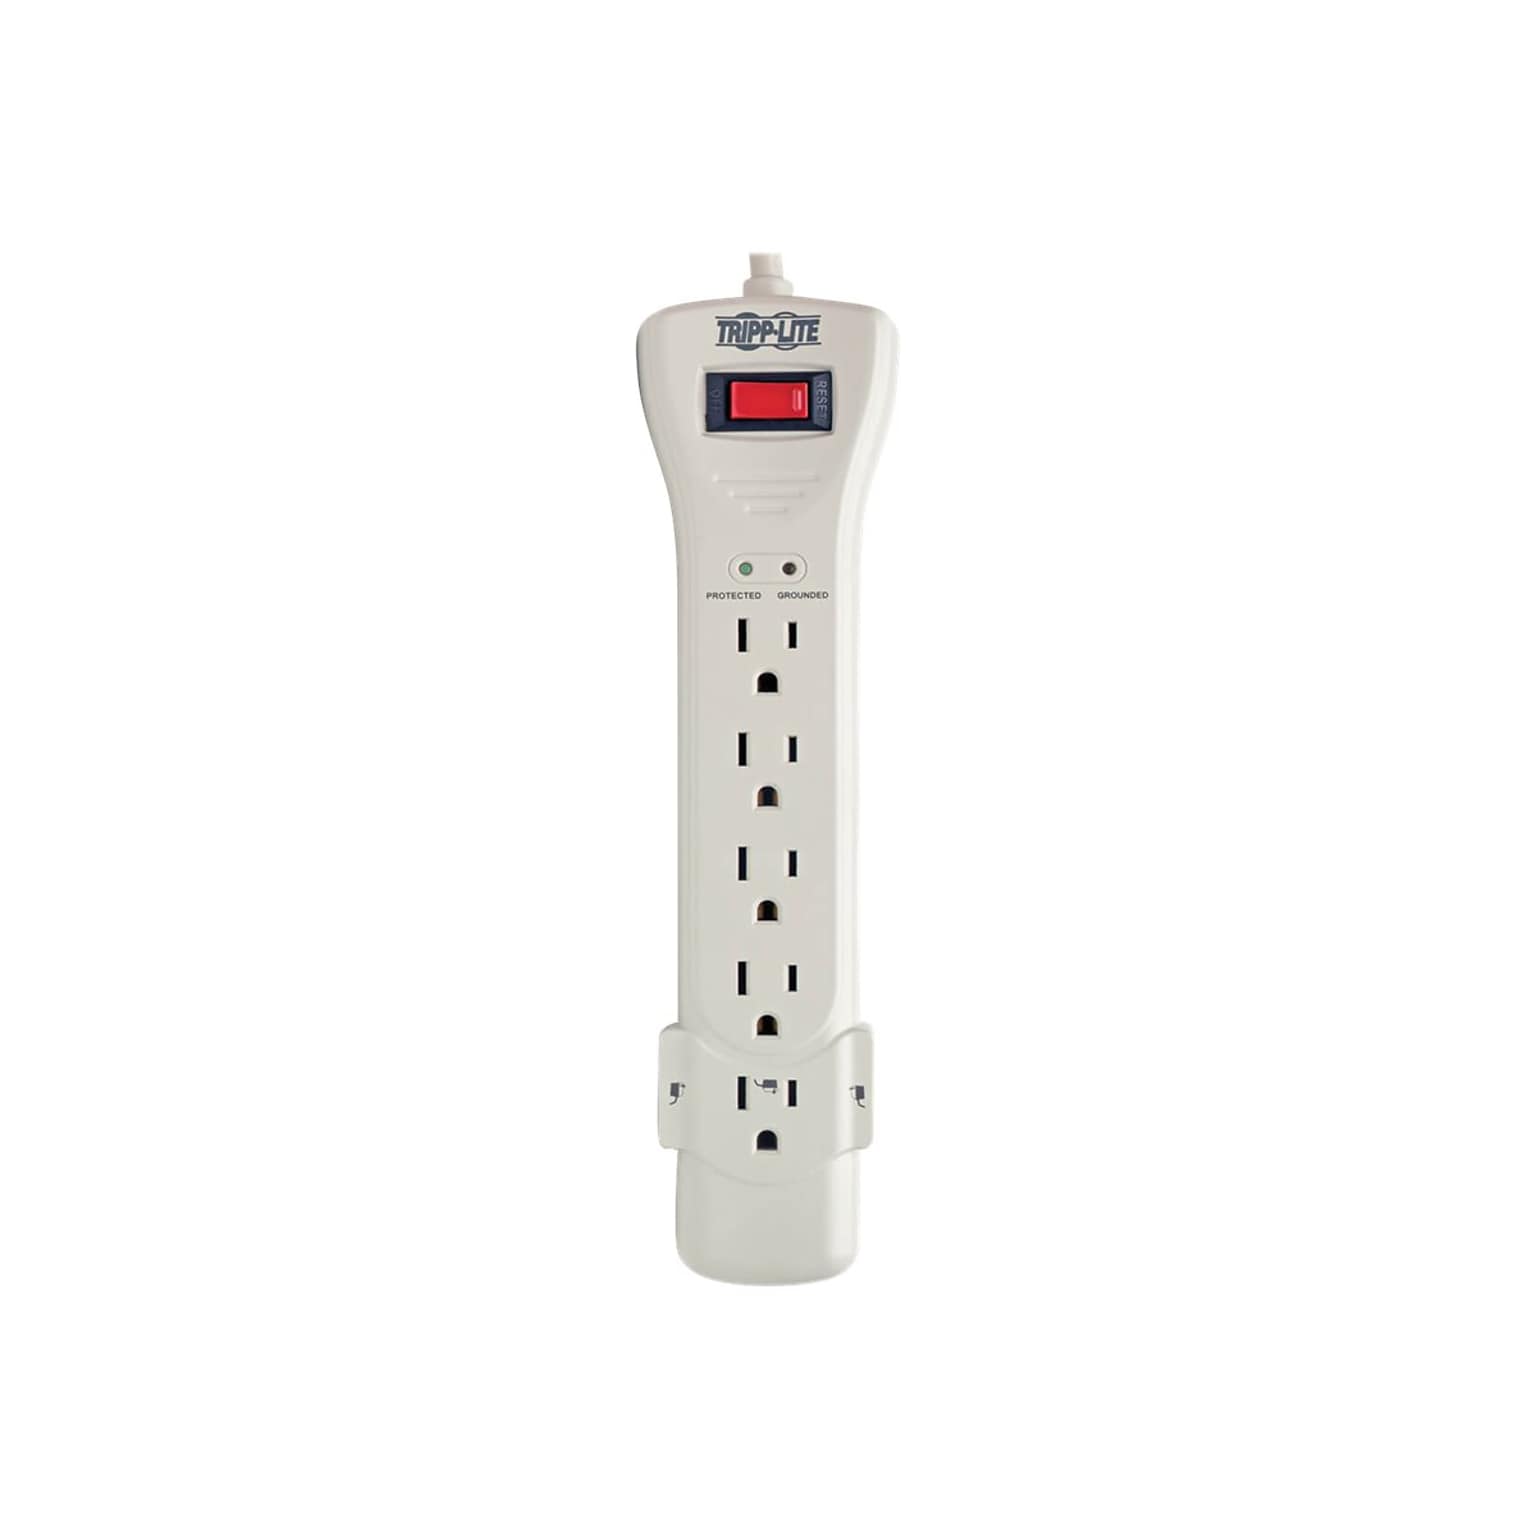 Tripp Lite Protect It! 7-Outlet Surge Protector, 7 Cord, Light Gray (TRPSUPER7)